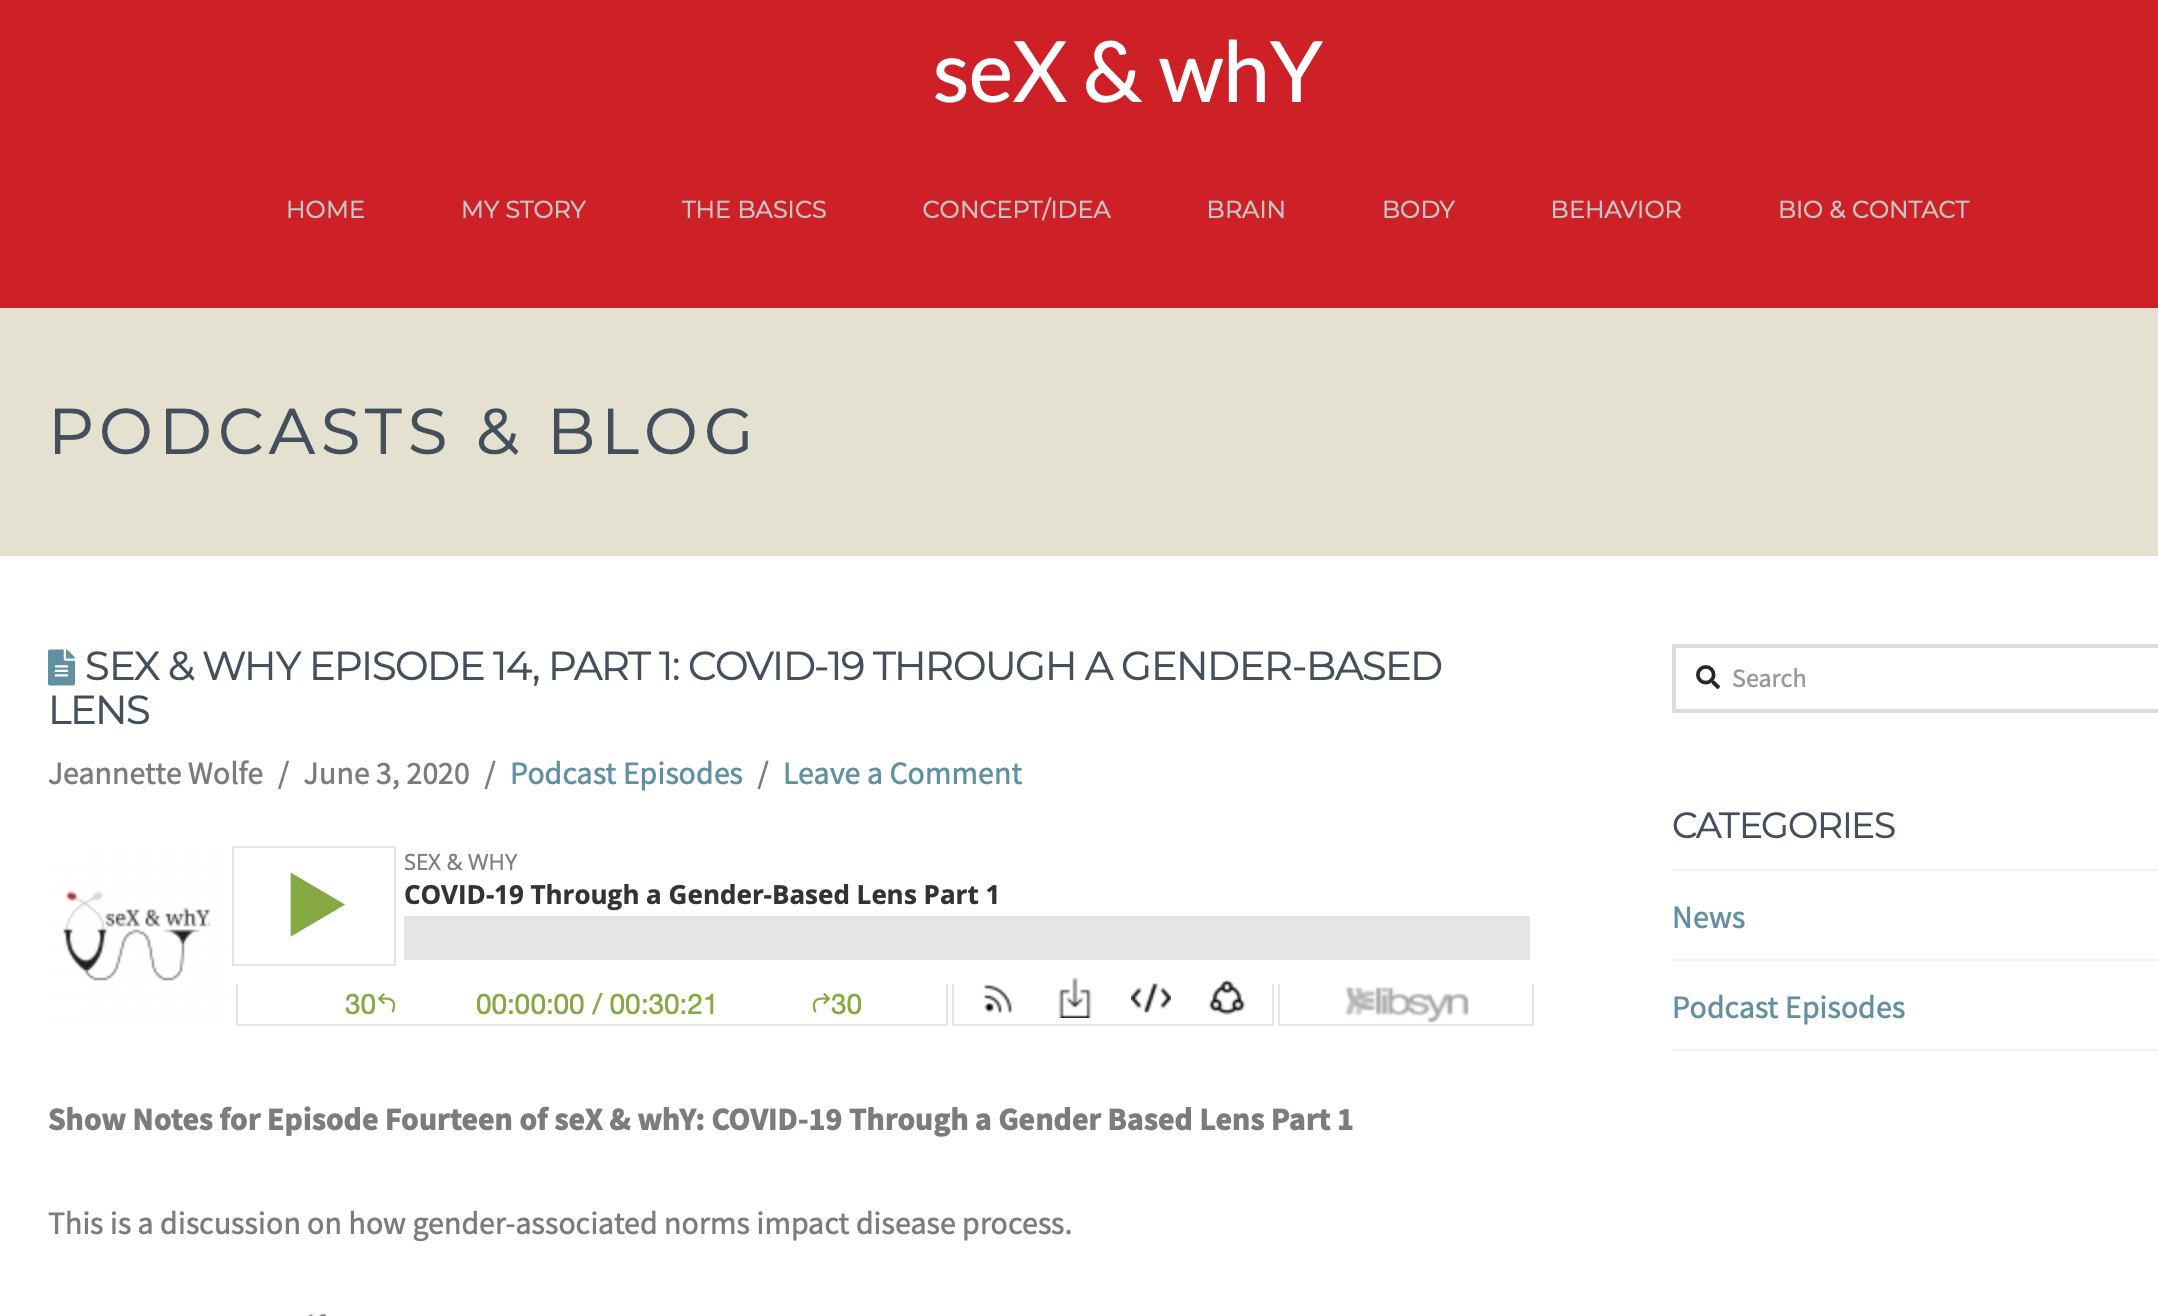 seX & whY episode 14, part 1- COVID-19 through a gender-based lens